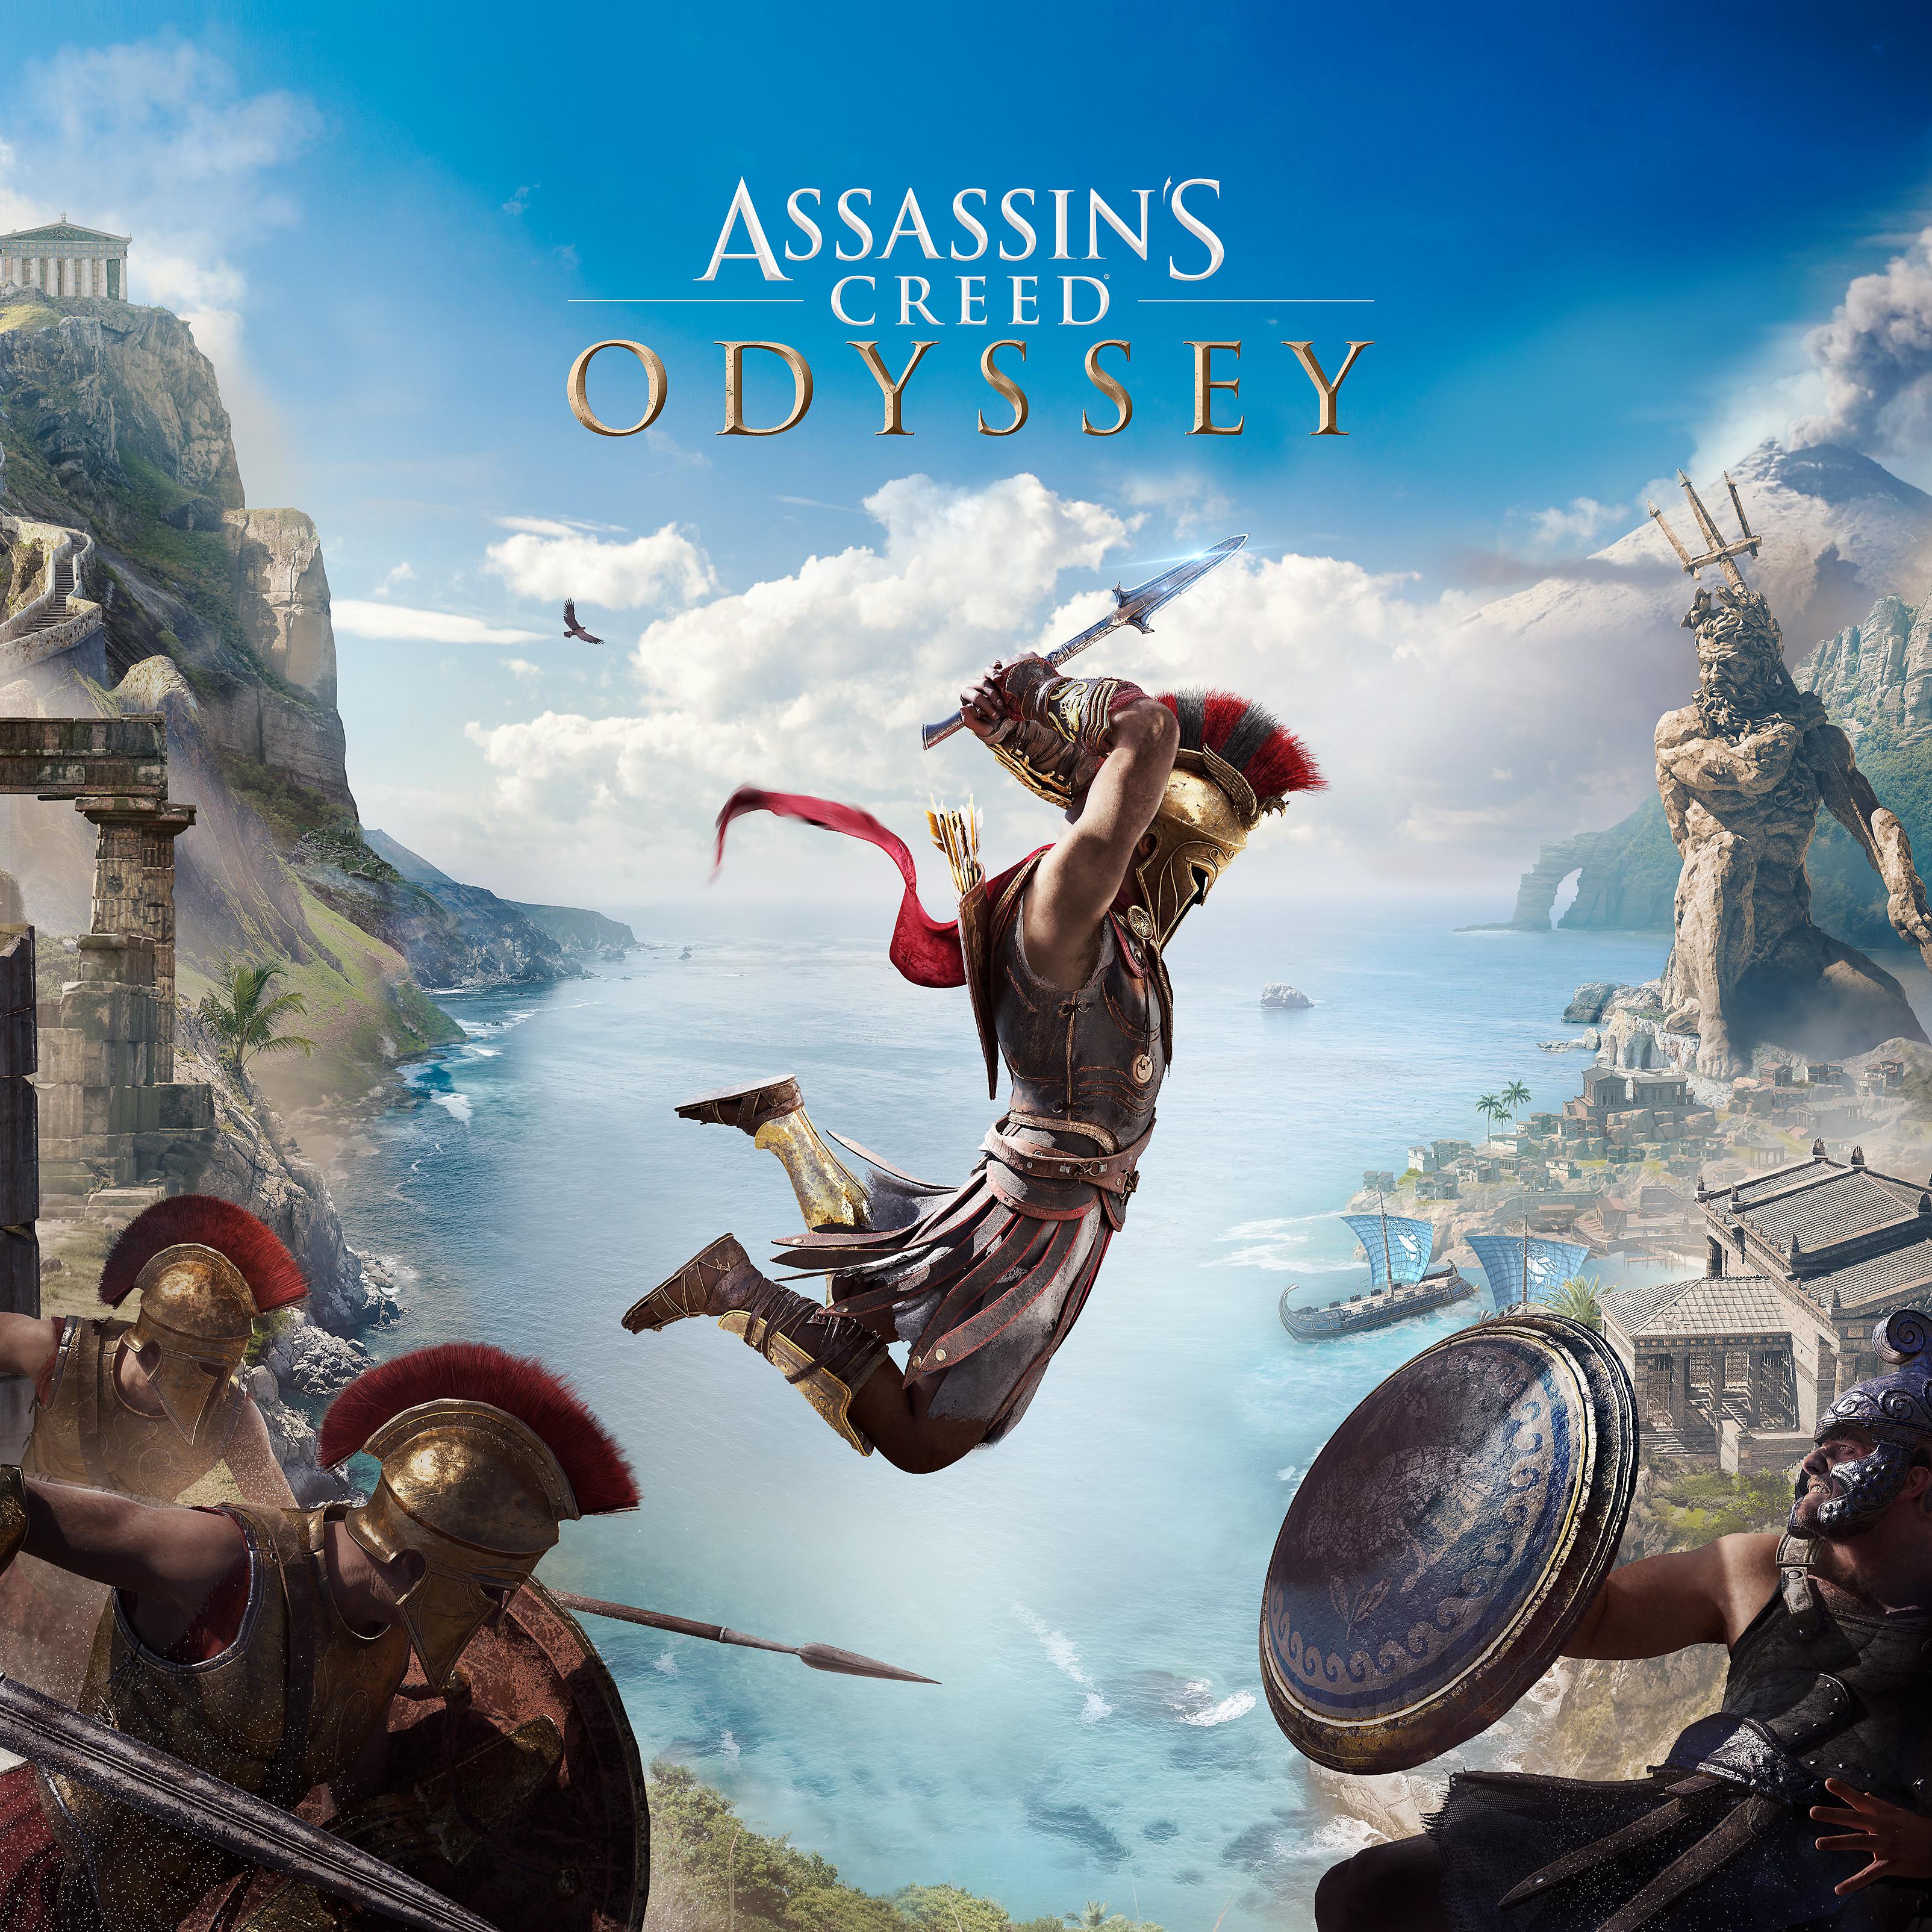 Assassin's Creed Odyssey Wallpaper / Assassin's Creed Odyssey HD